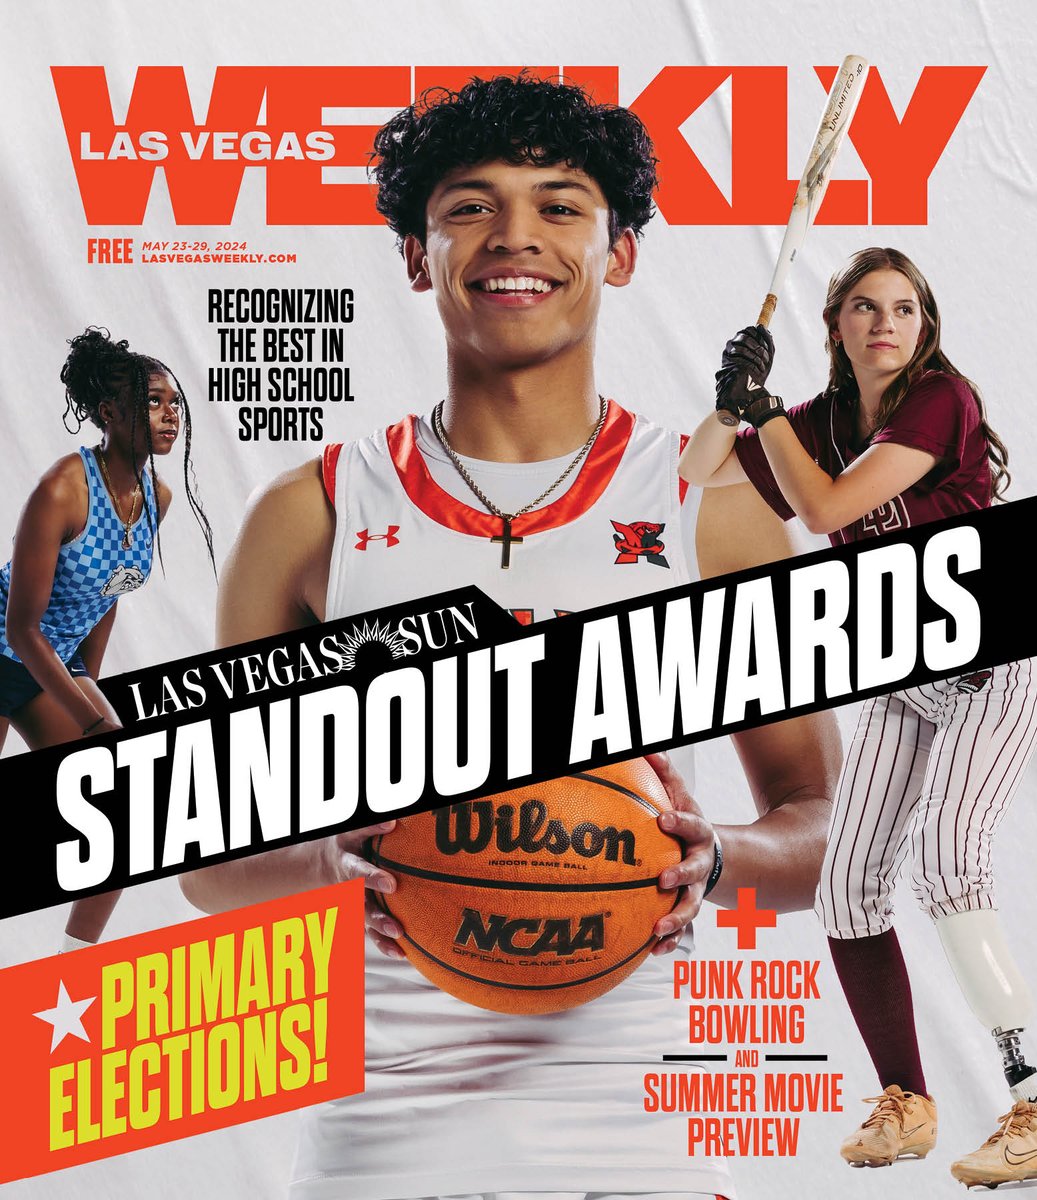 On this week's cover: The seventh annual Sun Standout Awards! Congratulations to all of our winners and thank you for an incredible year in high school sports! bit.ly/3yxgJoj